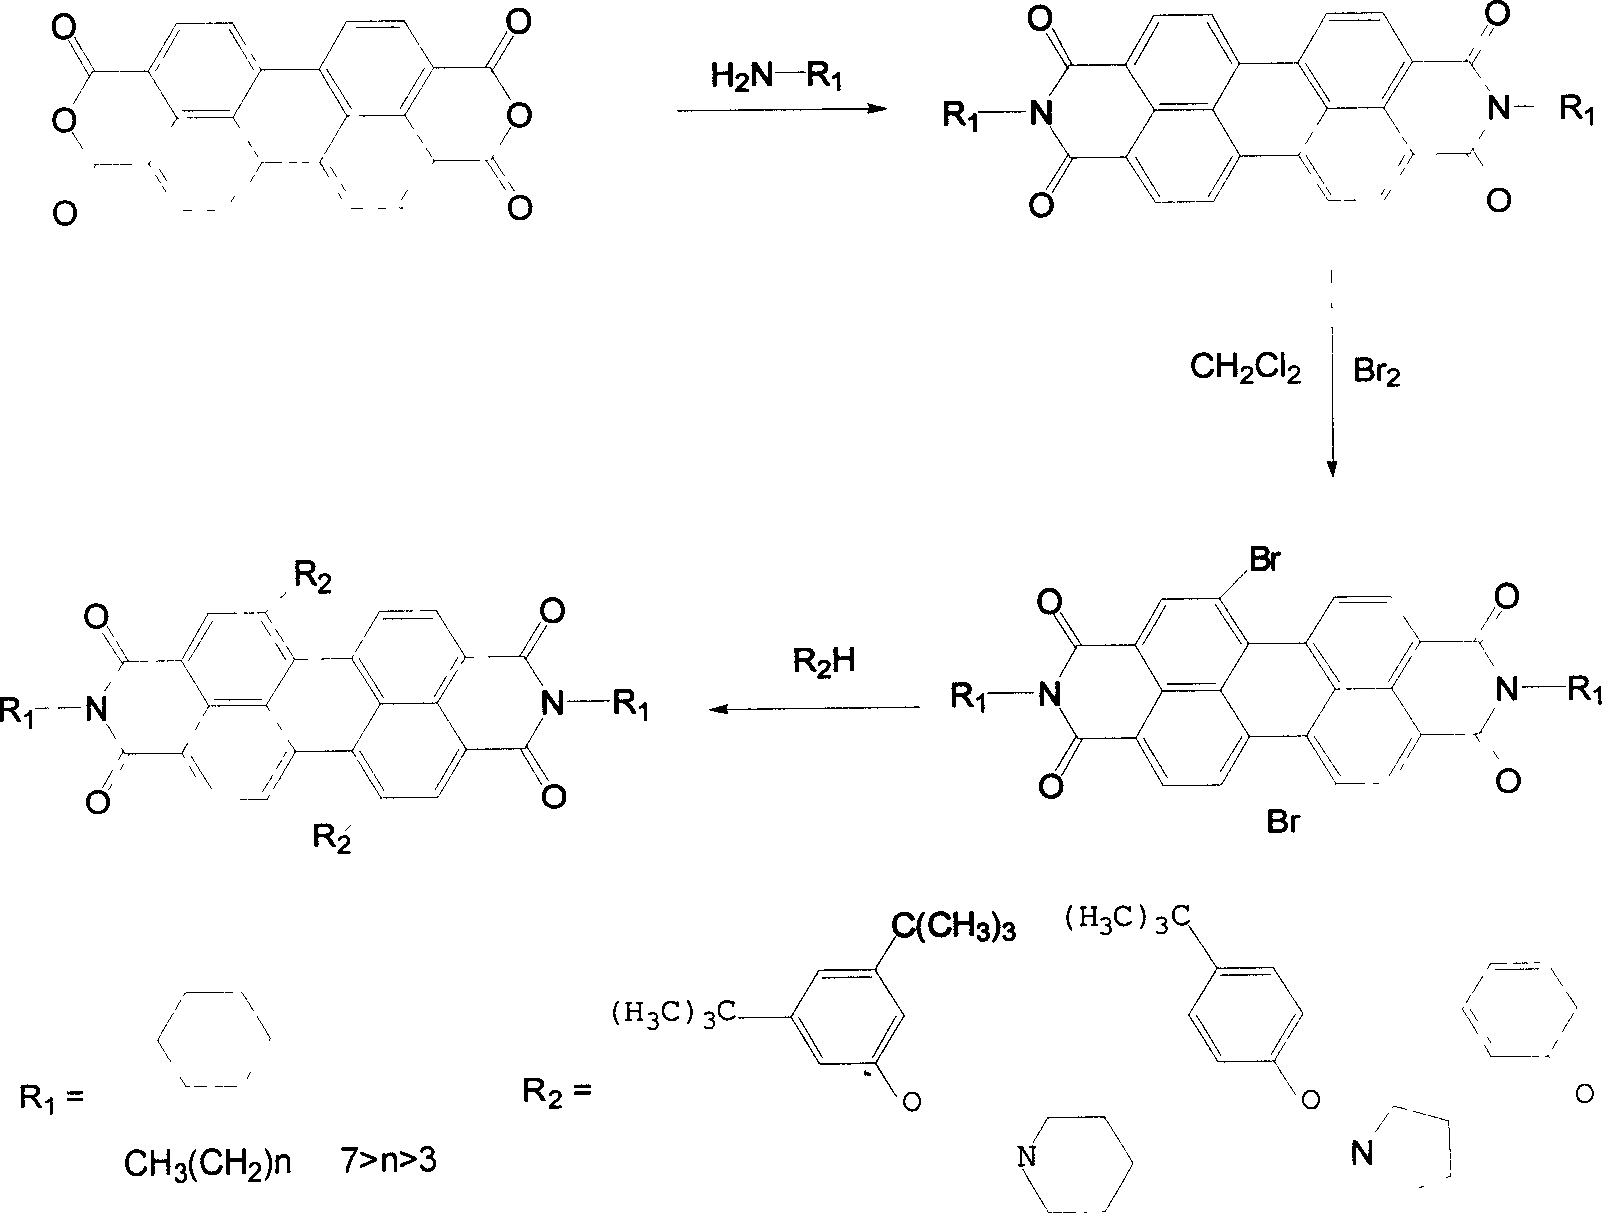 Synthesis process of 1,7-disubstituent-3,4:9,10-perylene bisimide